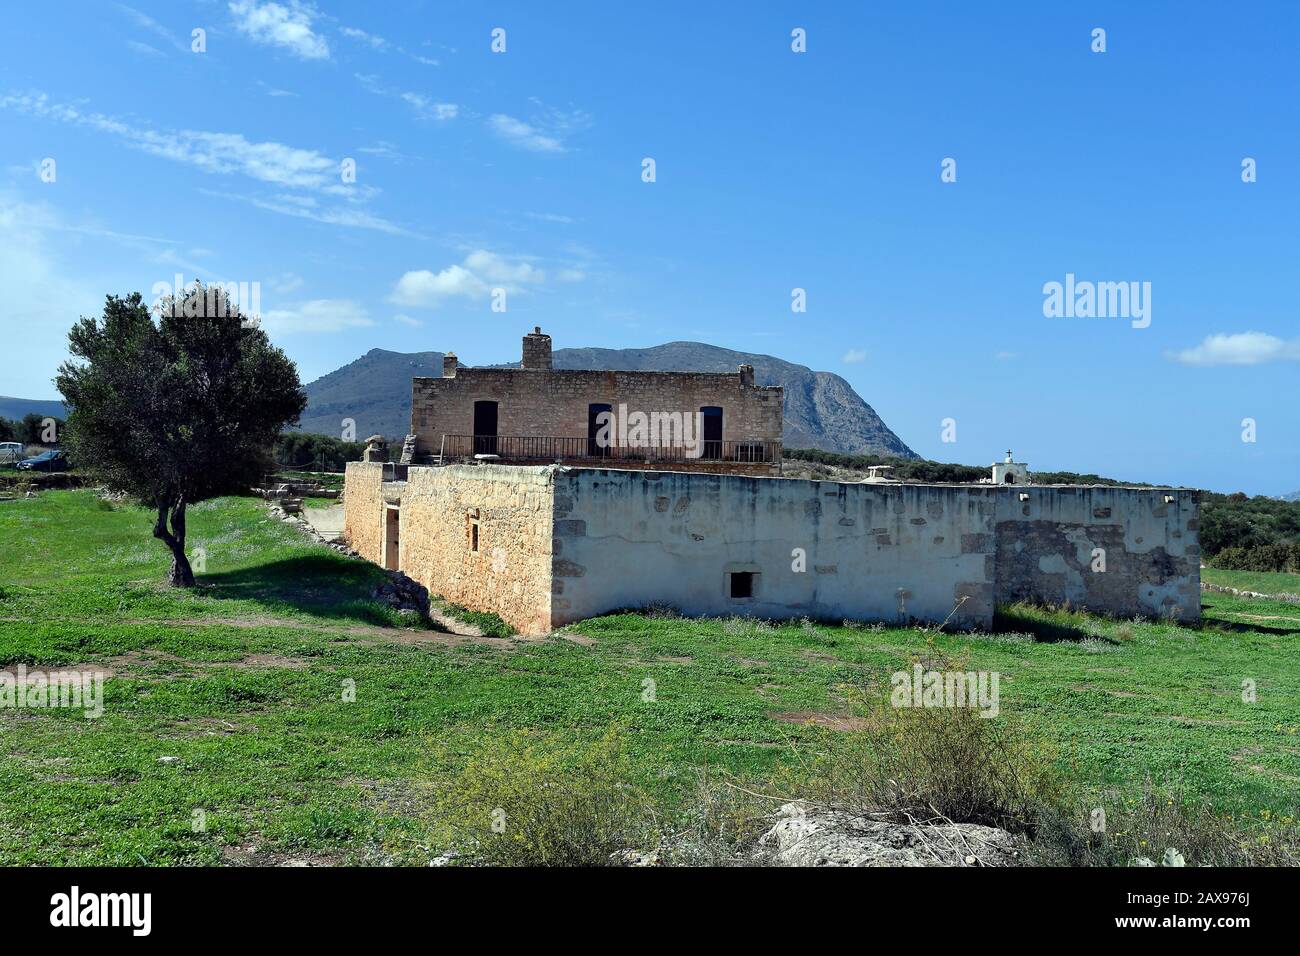 Greece, old monastery St. John the Theologian in ancient archaelogical site of Aptera in Crete Stock Photo